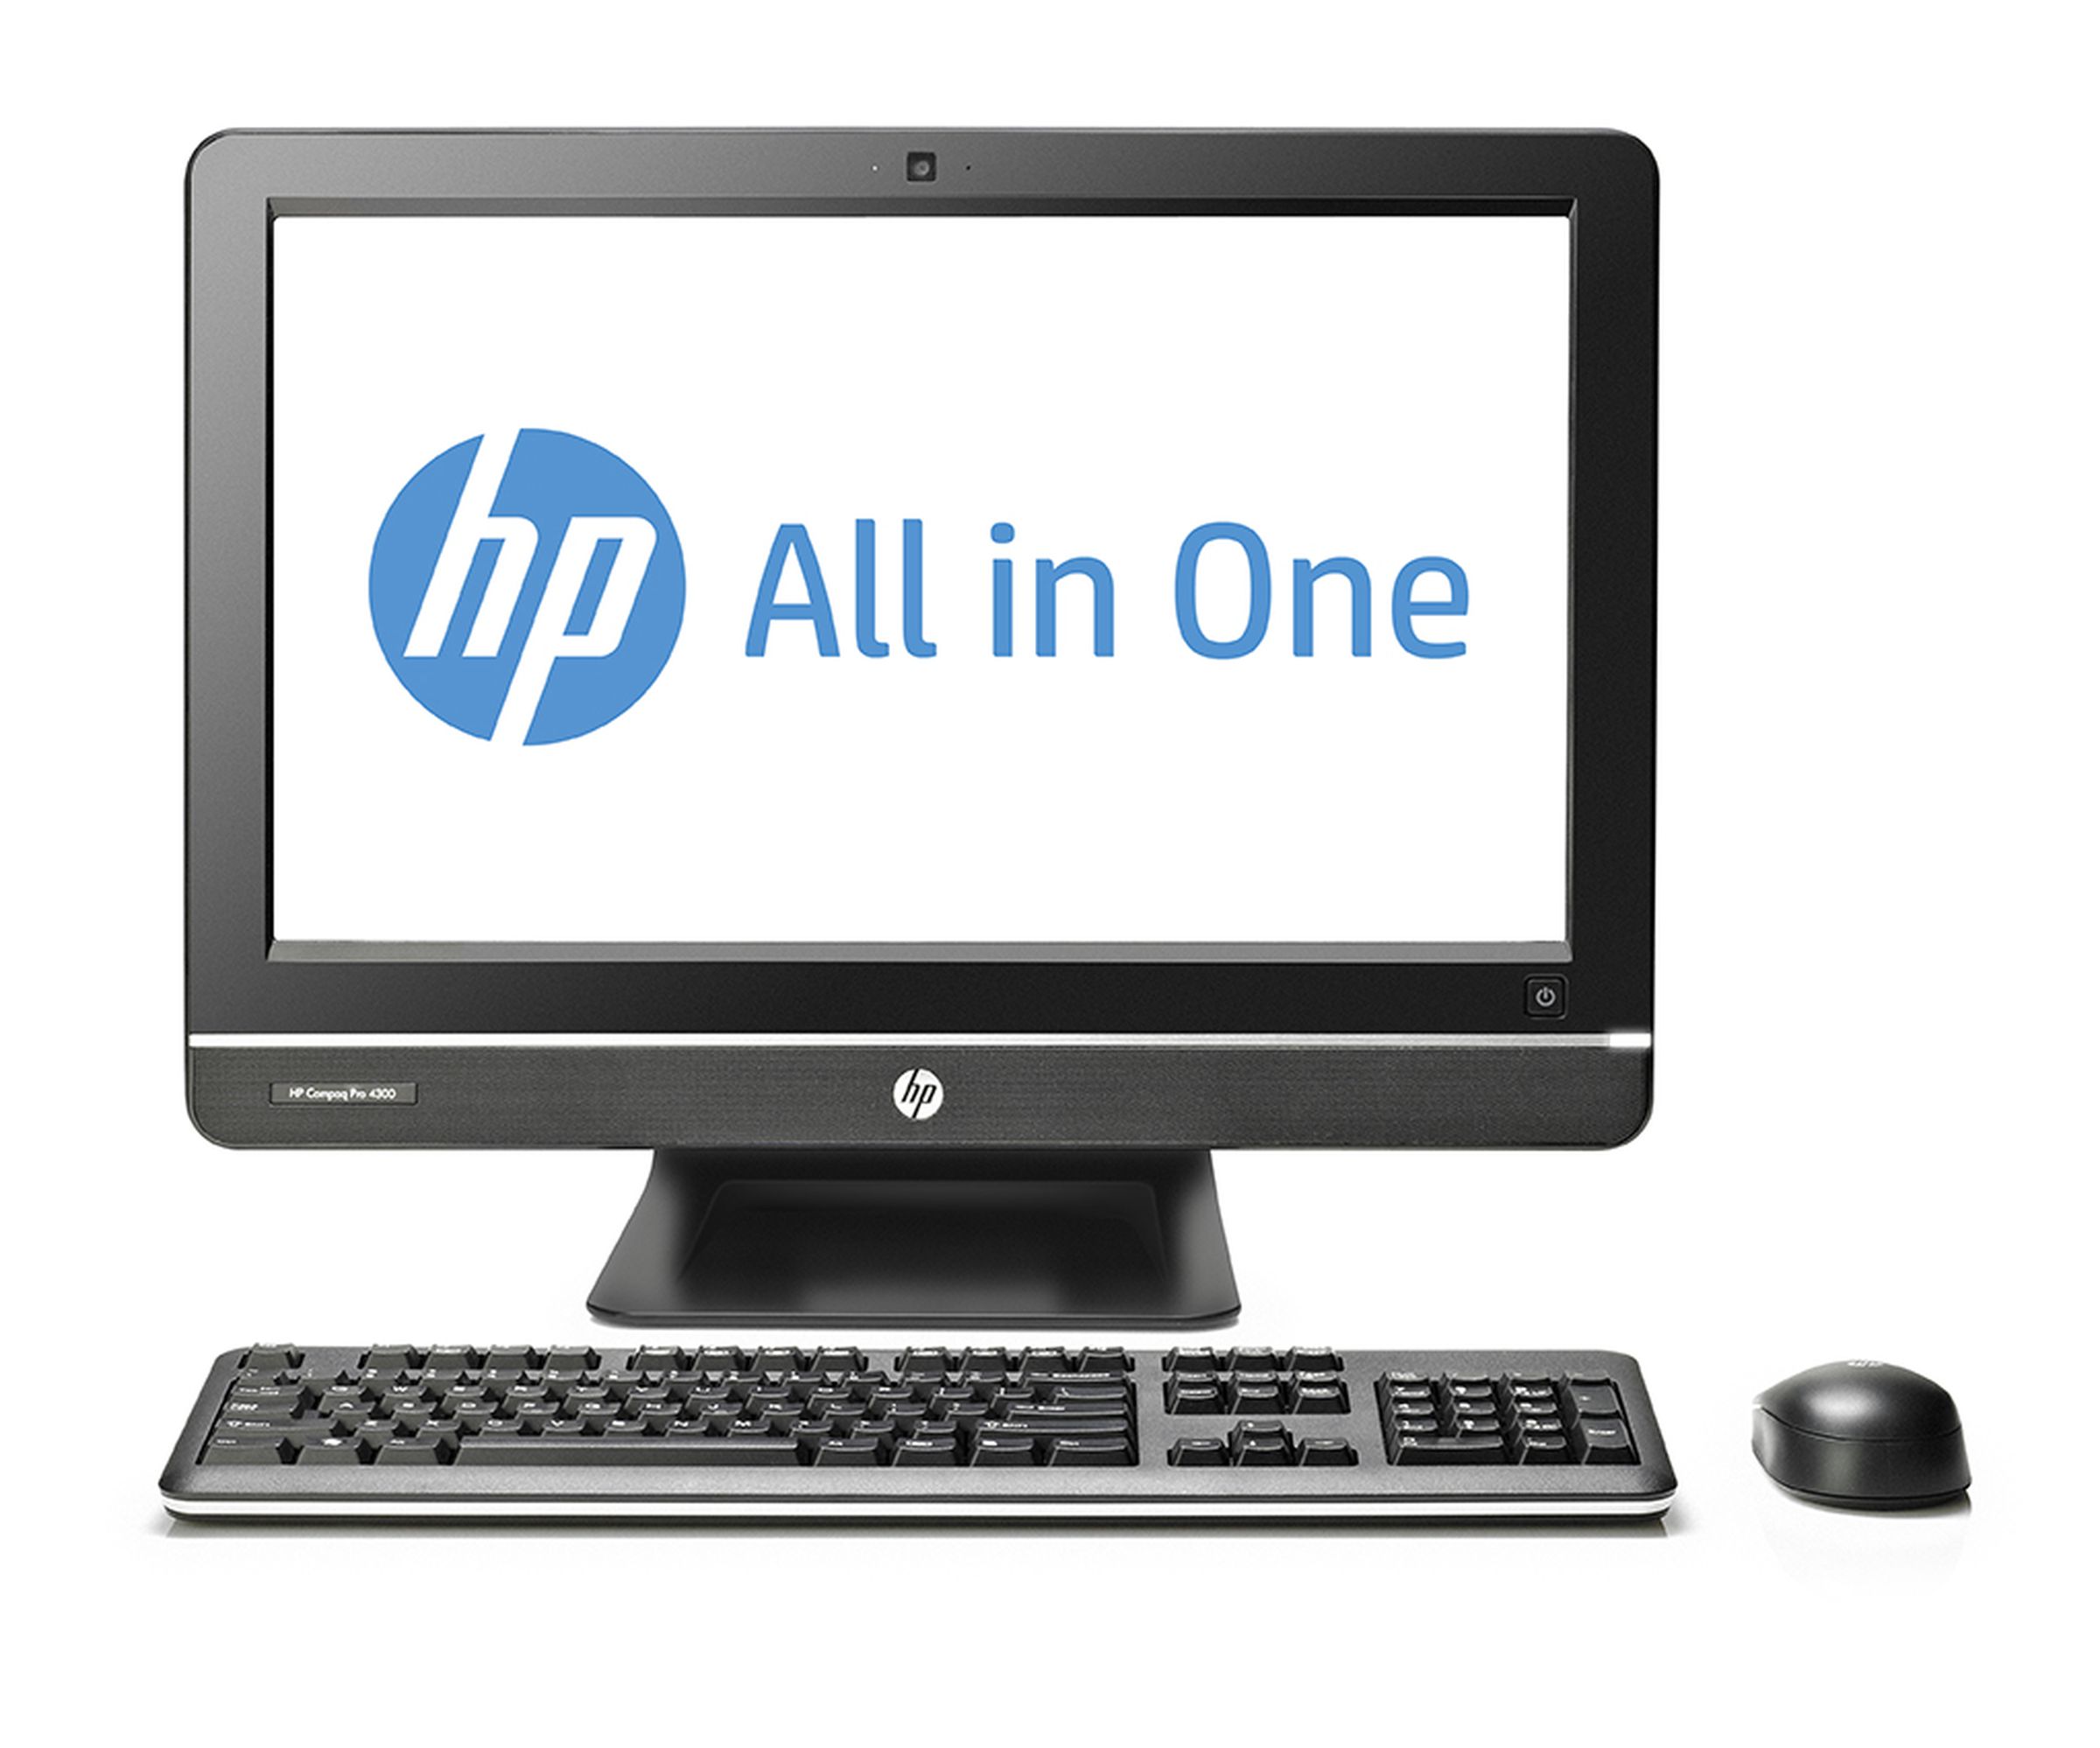 HP Compaq Elite 8300, Pro 6300, and Pro 4300 all-in-one press pictures